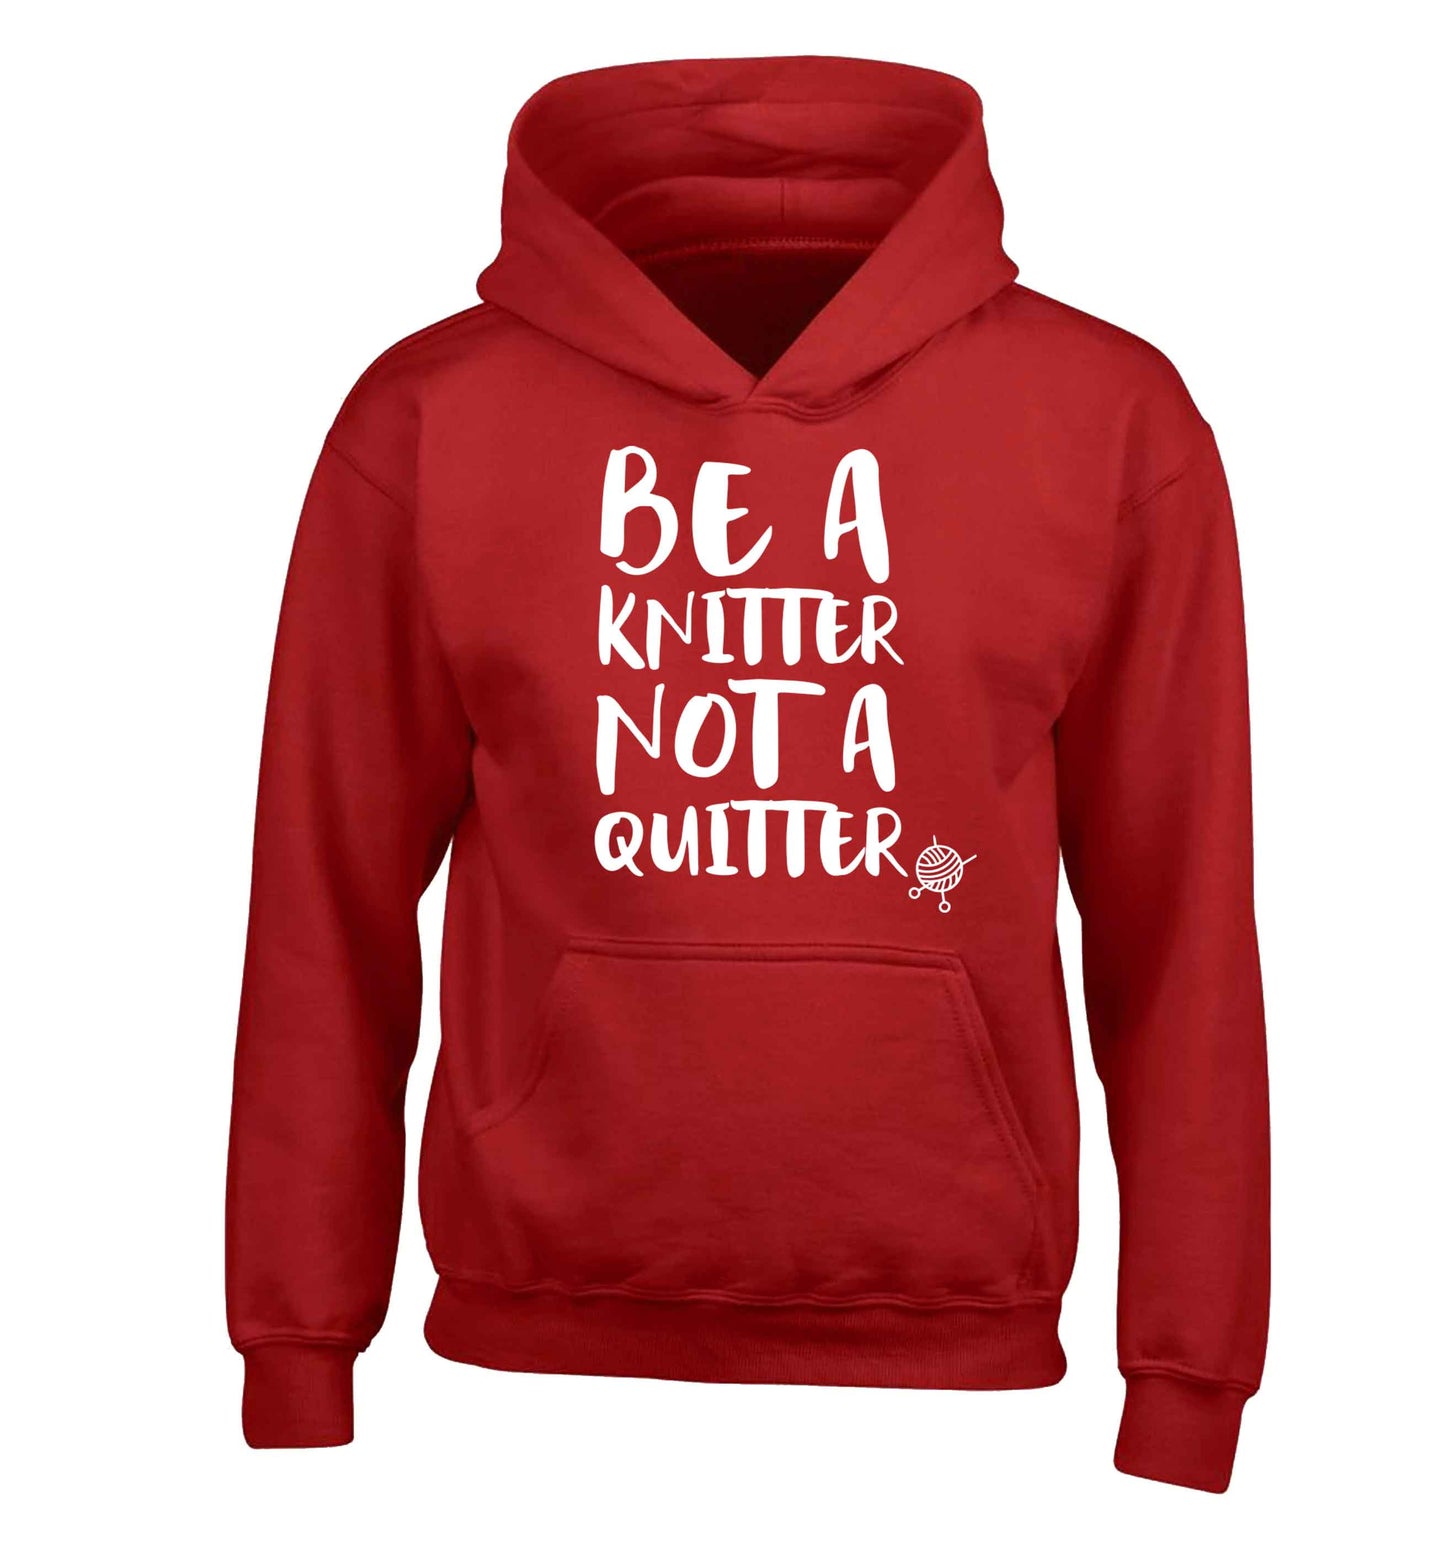 Be a knitter not a quitter children's red hoodie 12-13 Years